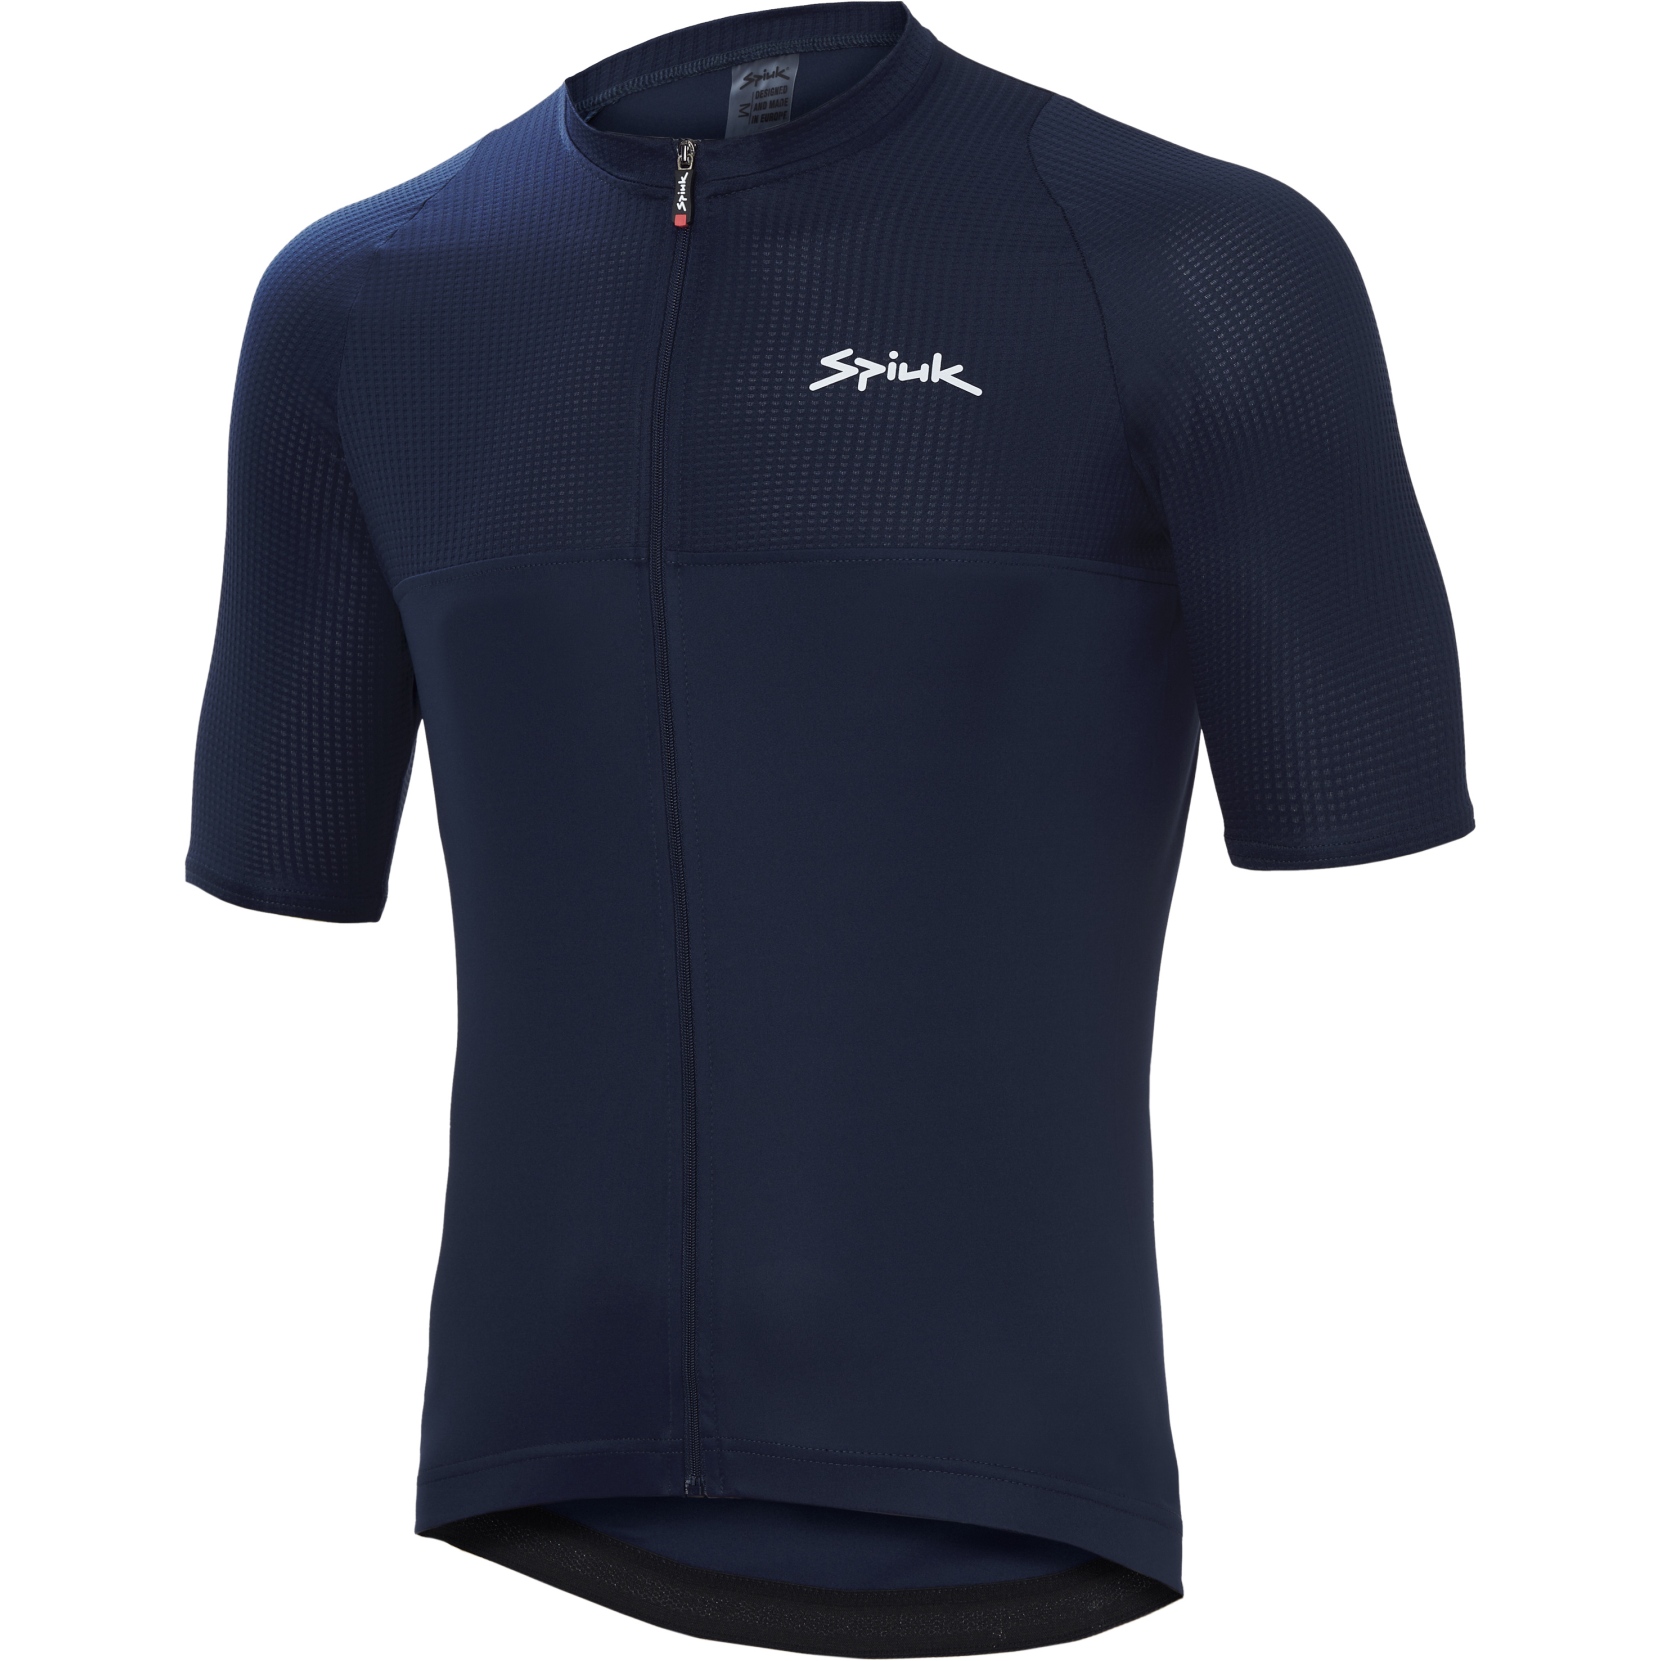 Picture of Spiuk ANATOMIC Short Sleeve Jersey - dark blue